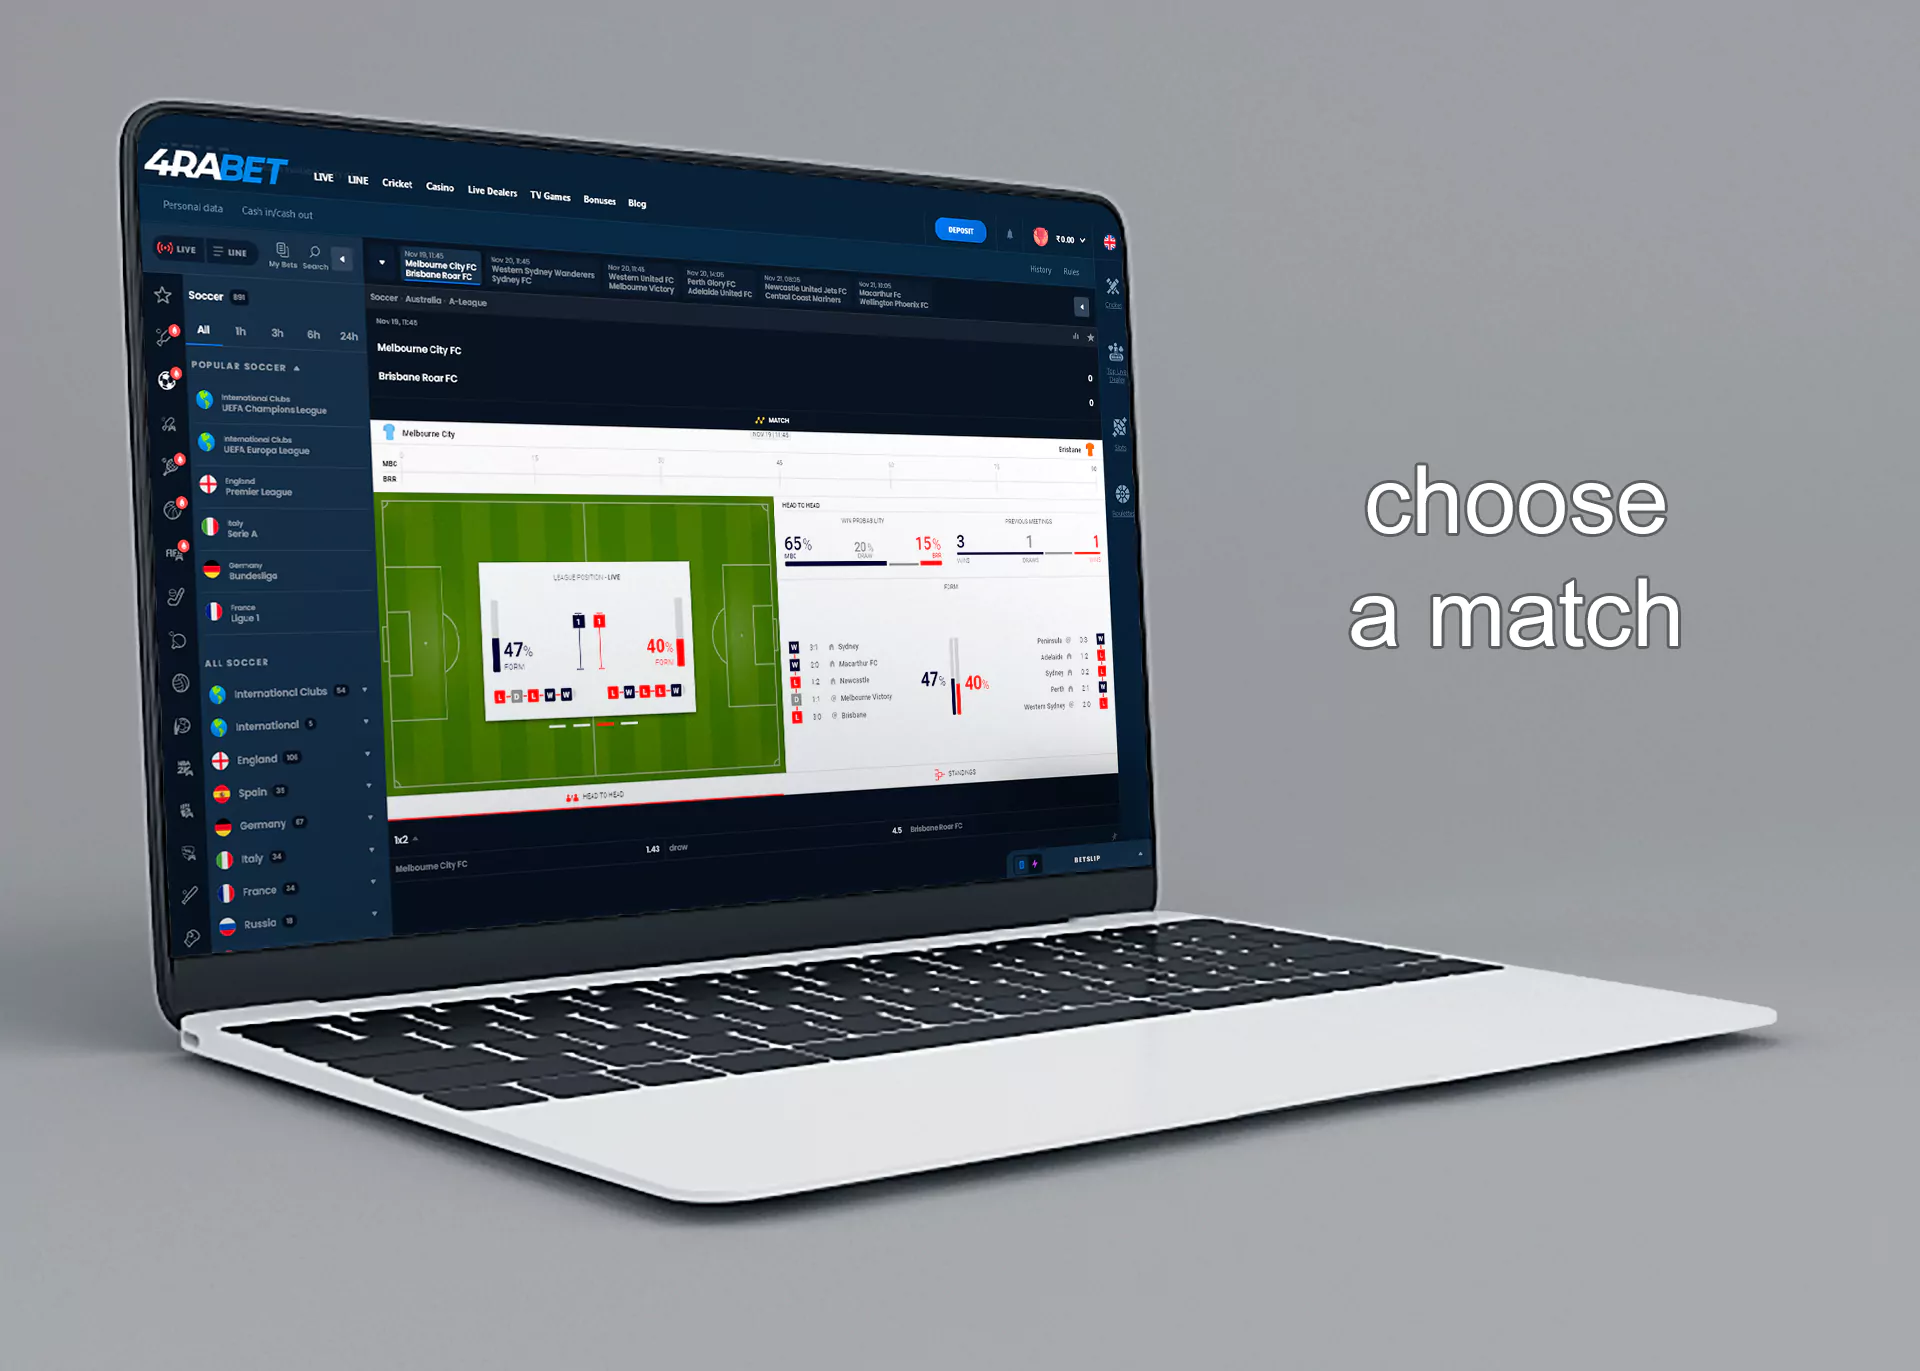 Choose the match you want to place a bet on.